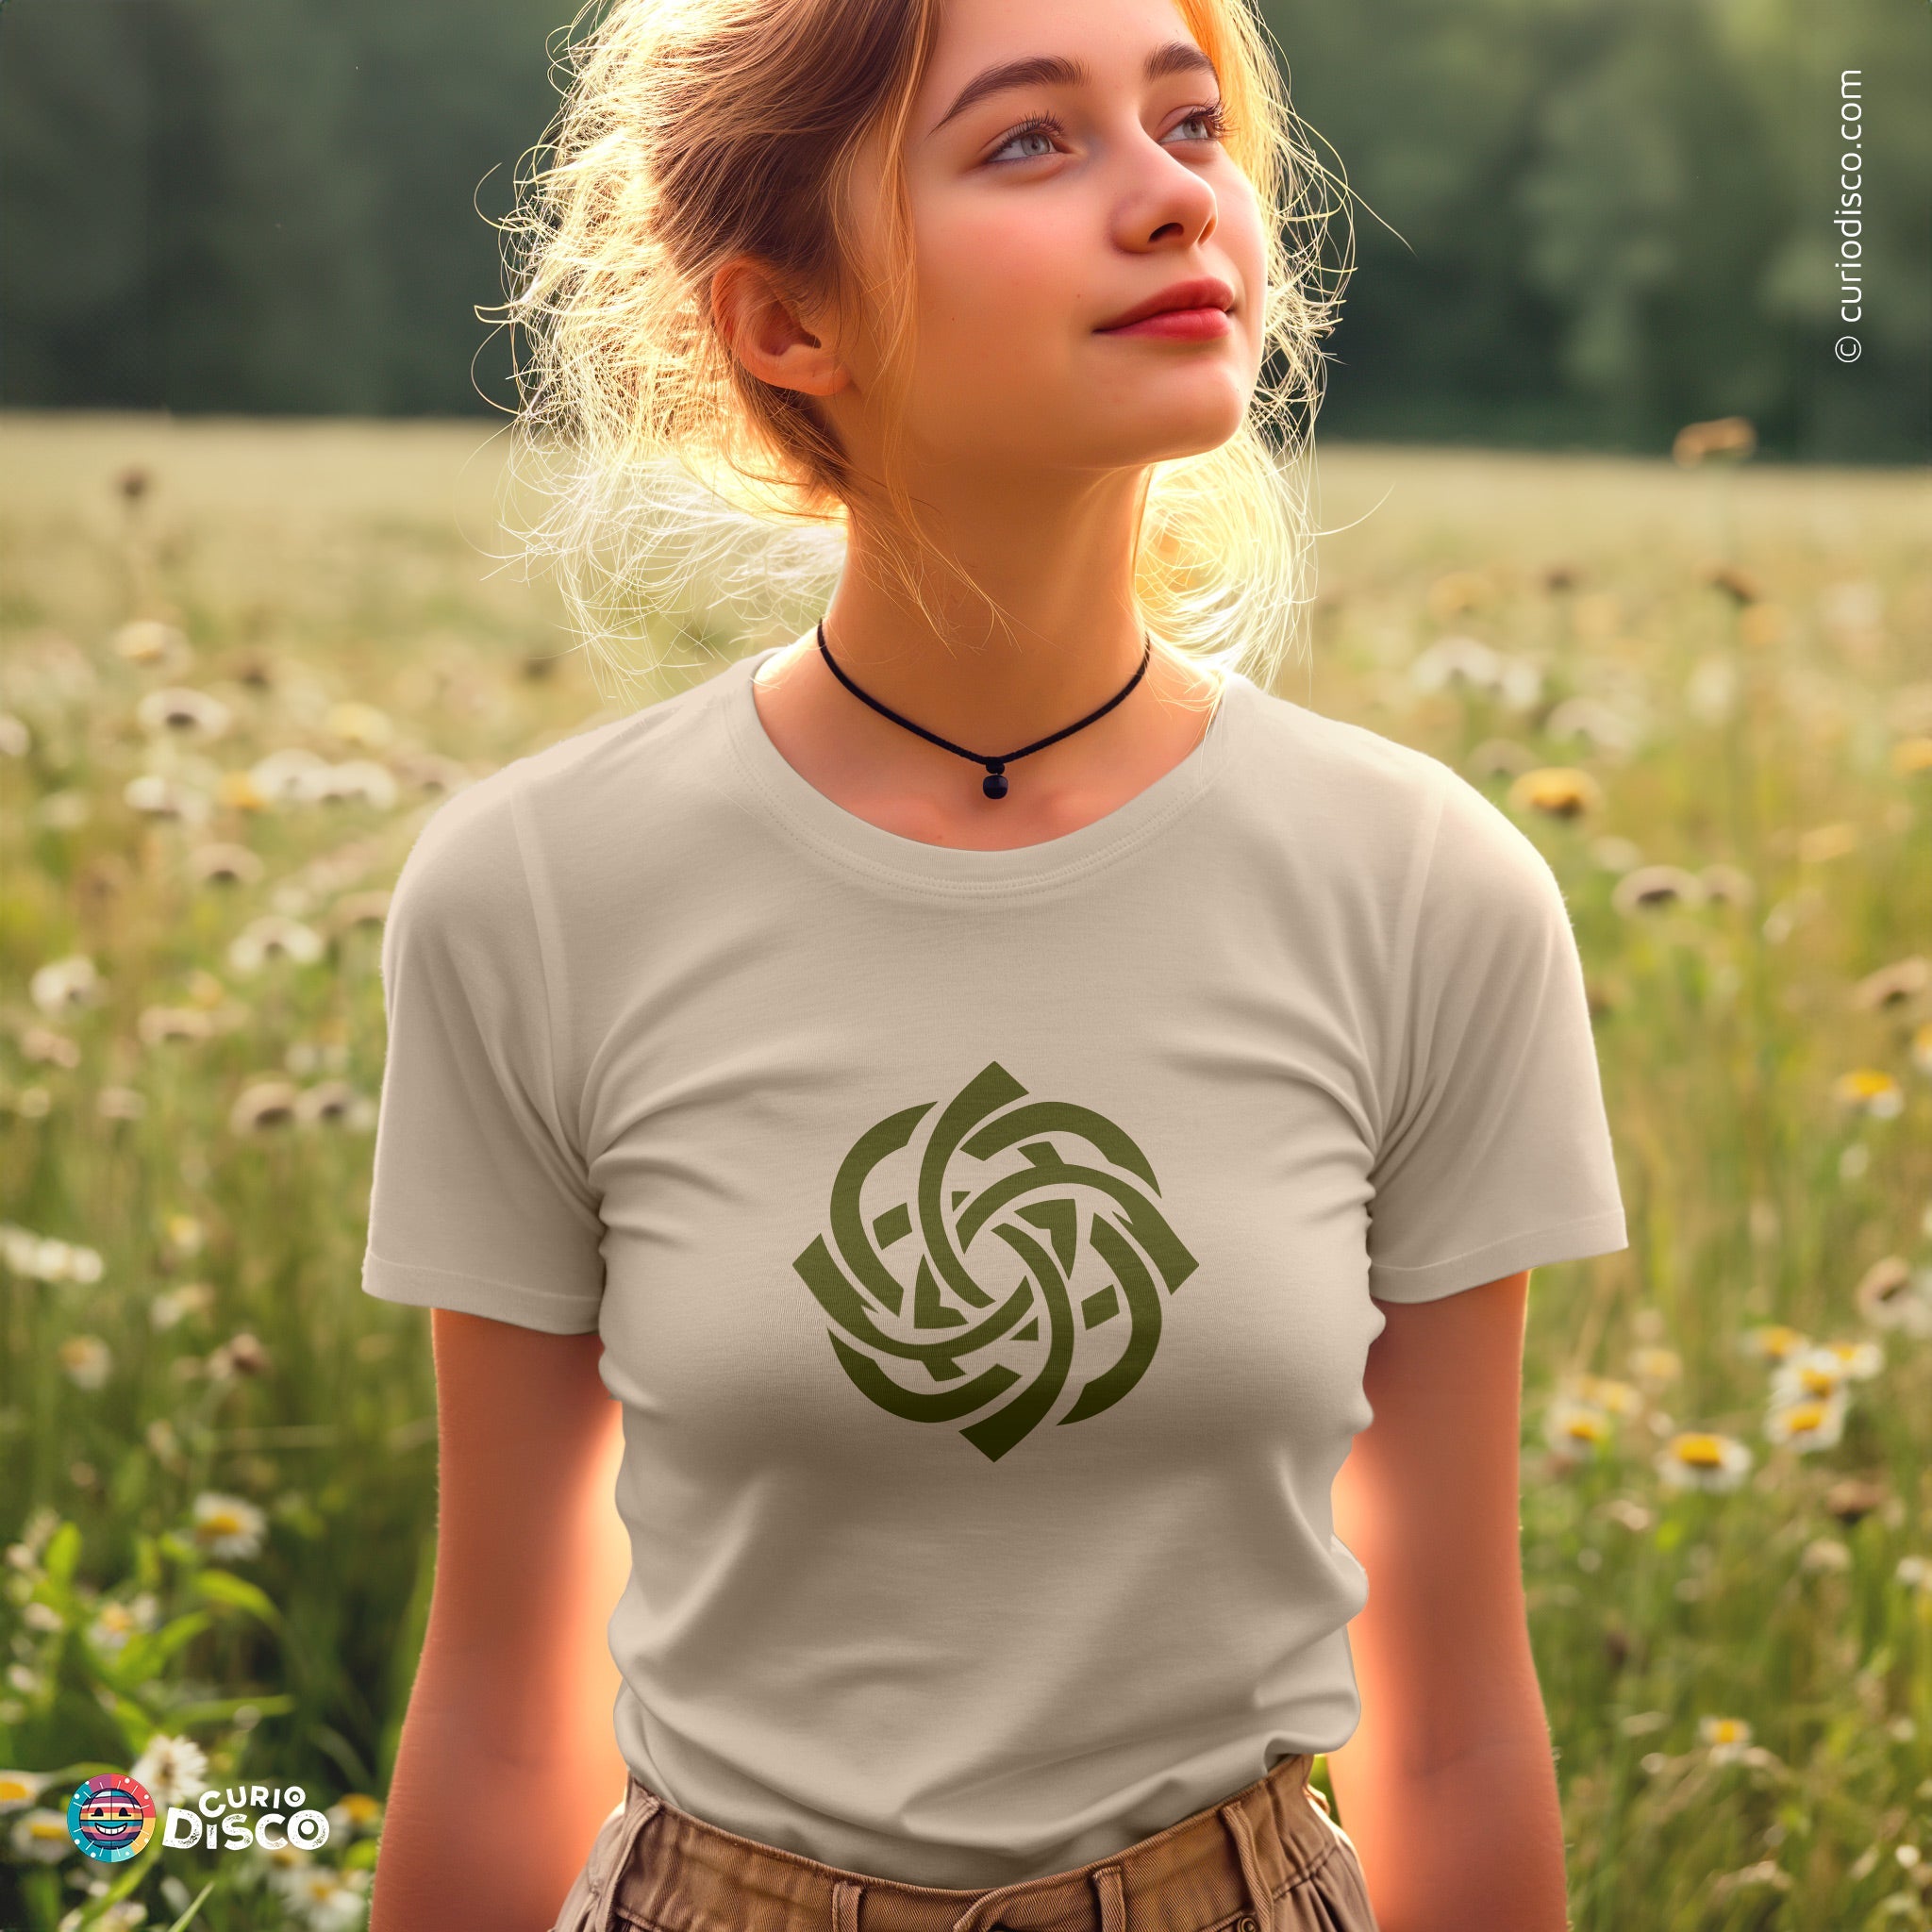 Soft cream tree of life yoga shirt with celtic knot, ideal as love knot viking nordic celtic gifts, gifts for wife, yoga gifts for her, plus size clothing for mystical cottage core workout, and gifts for mom.